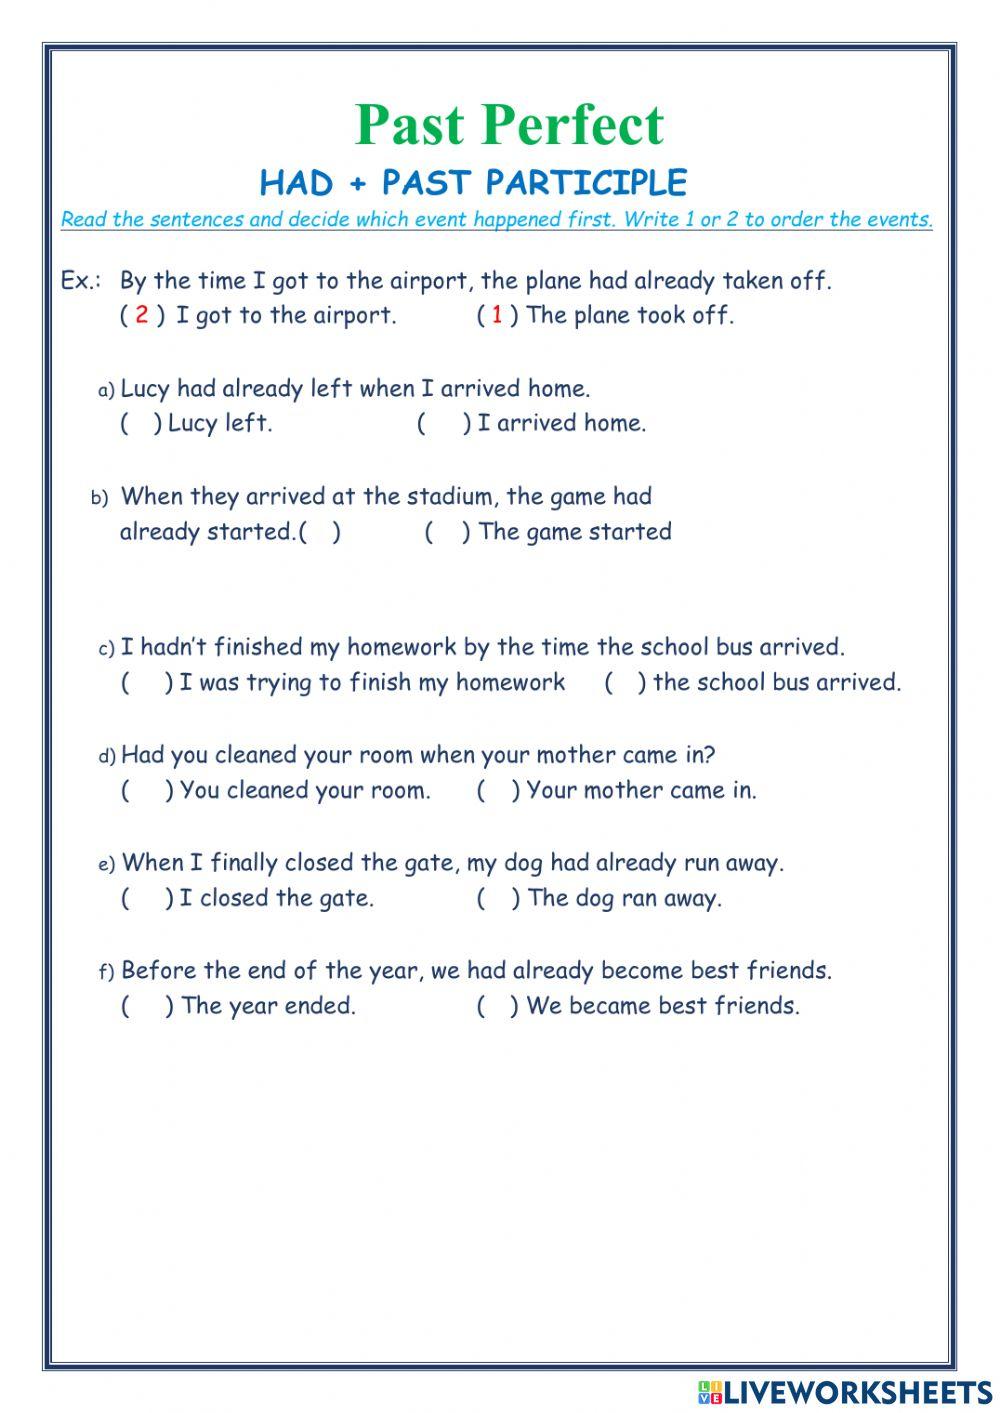 Past simple or Present perfect